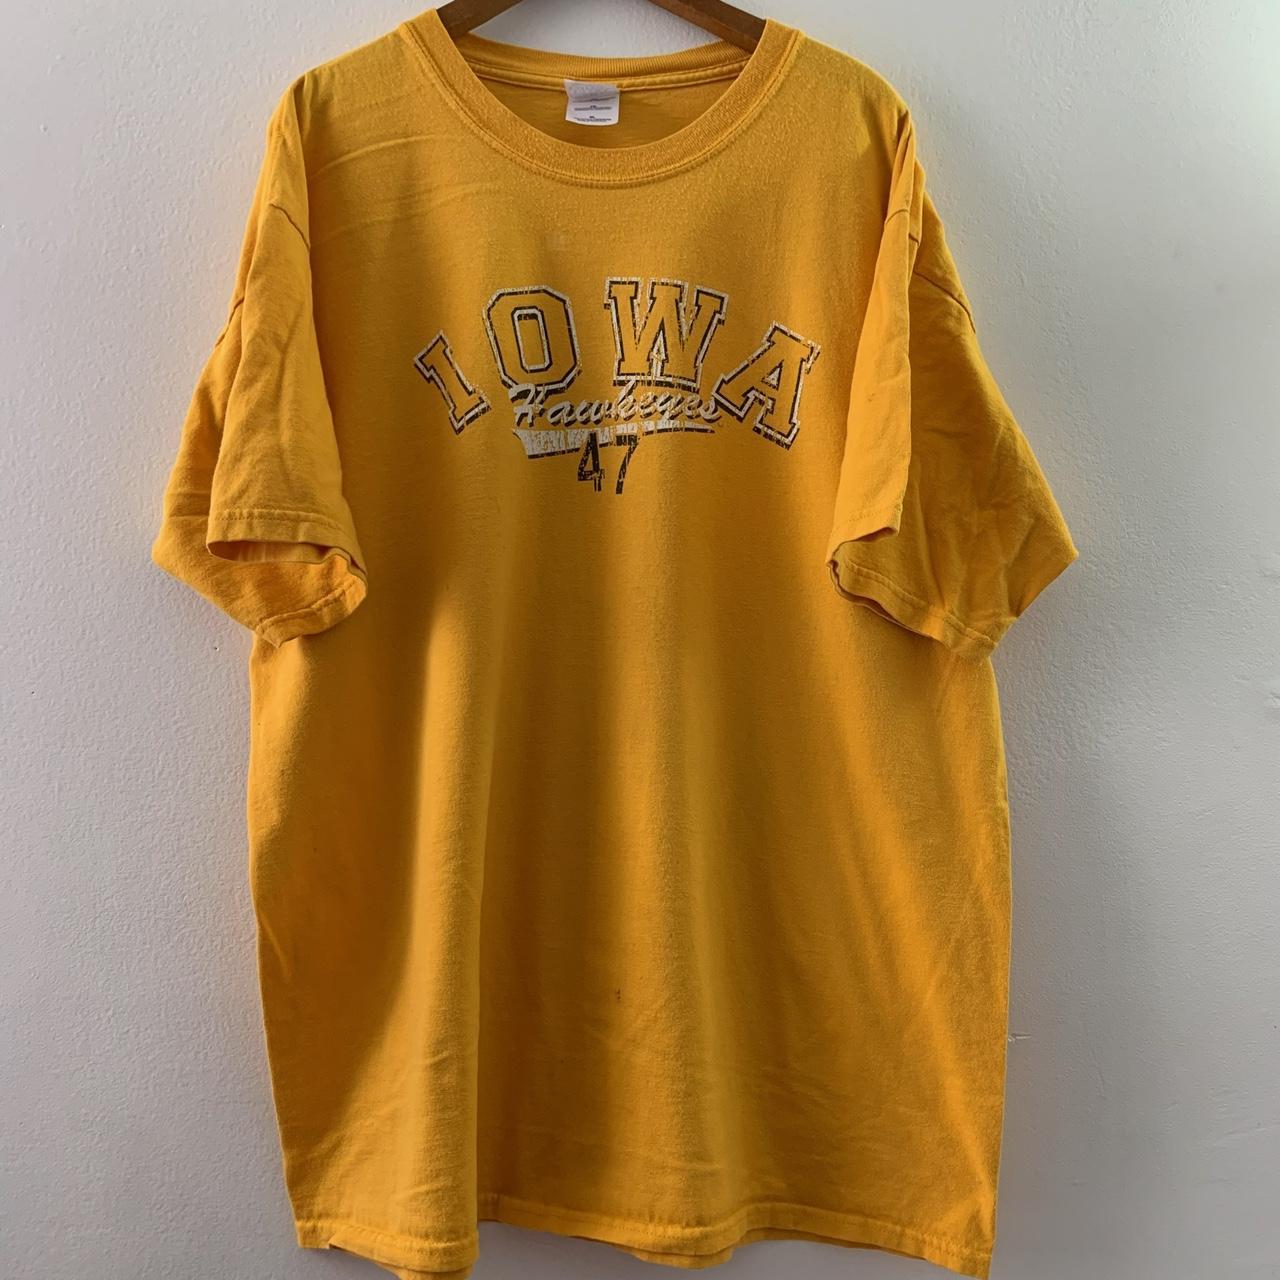 Vintage yellow Iowa Hawkeyes 47 spell out... - Depop